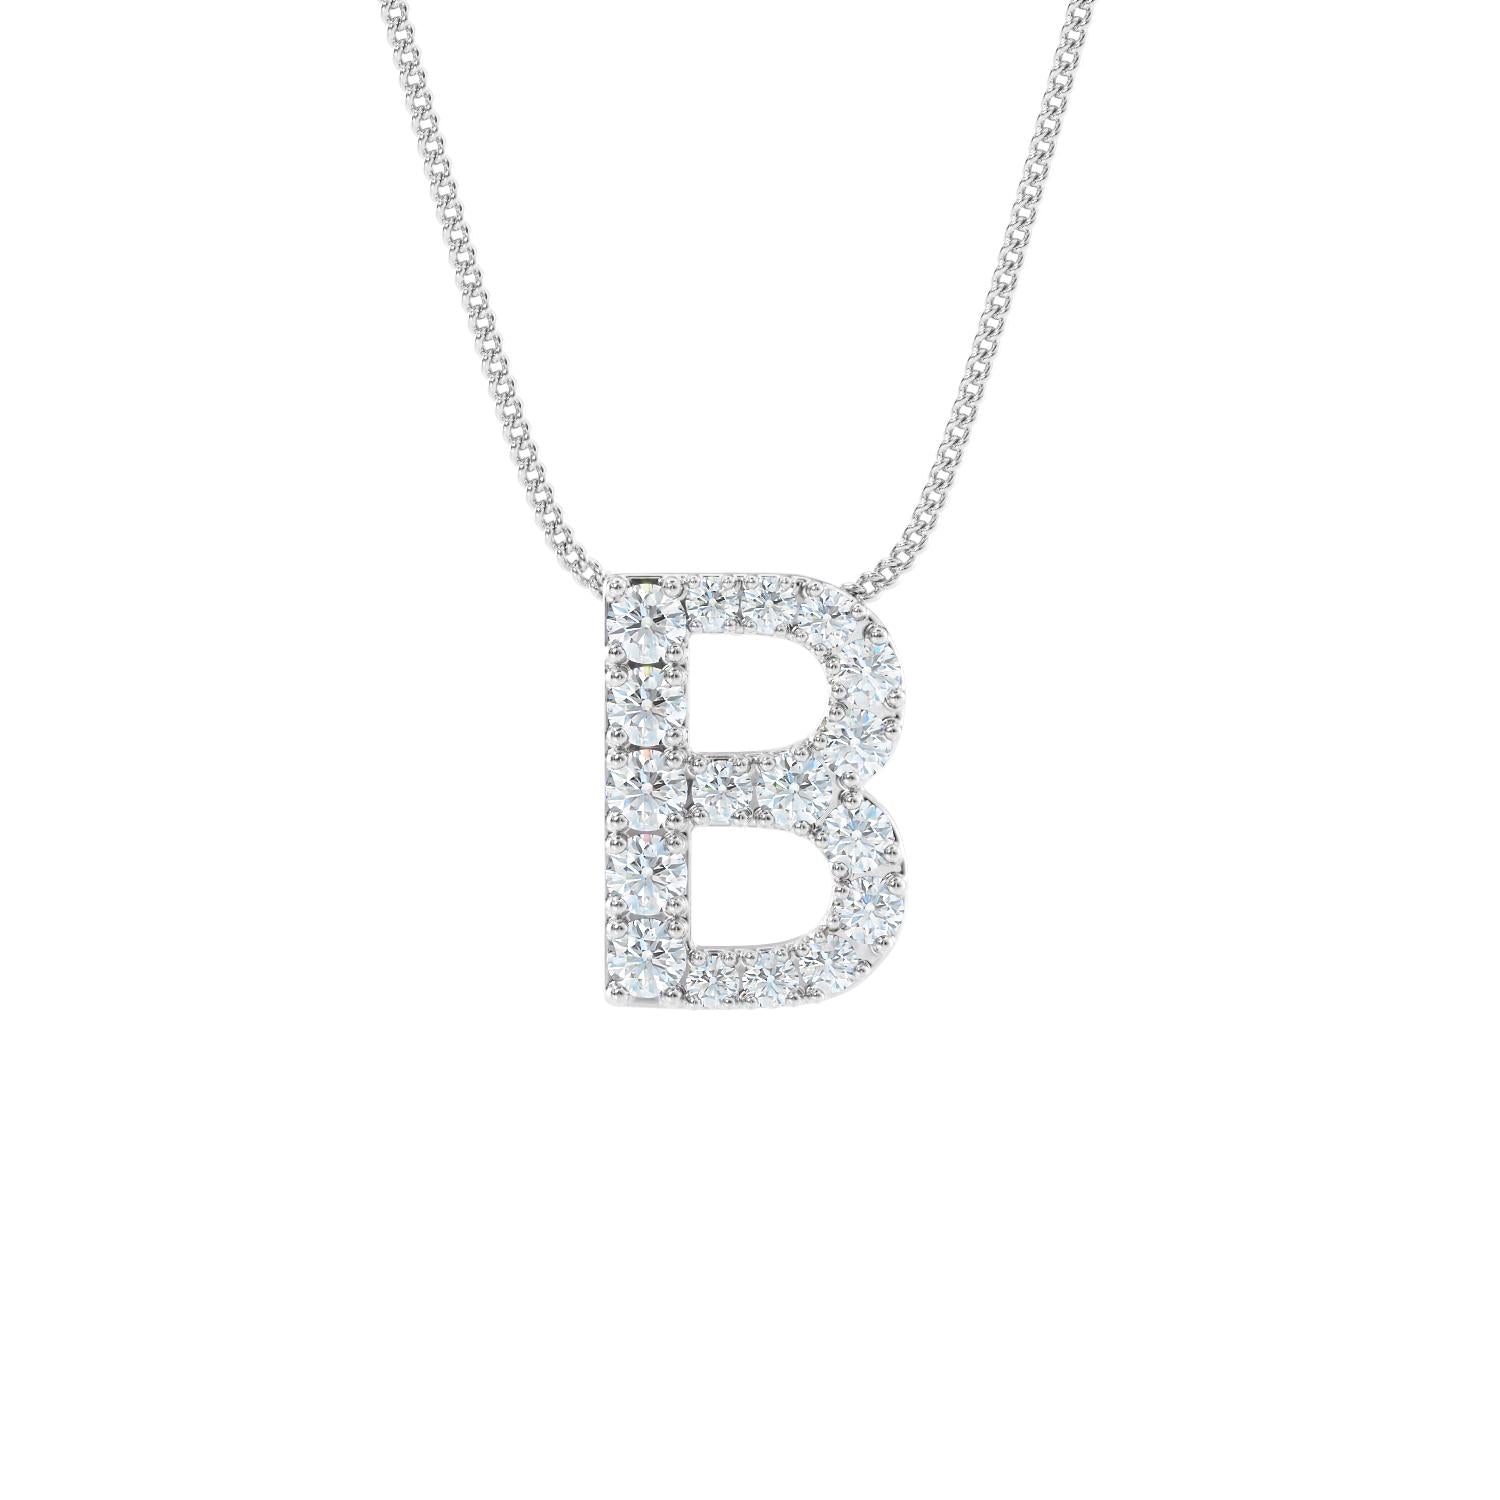 Crystal Letter B Silver Delicate Chain Bracelet in White Crystal